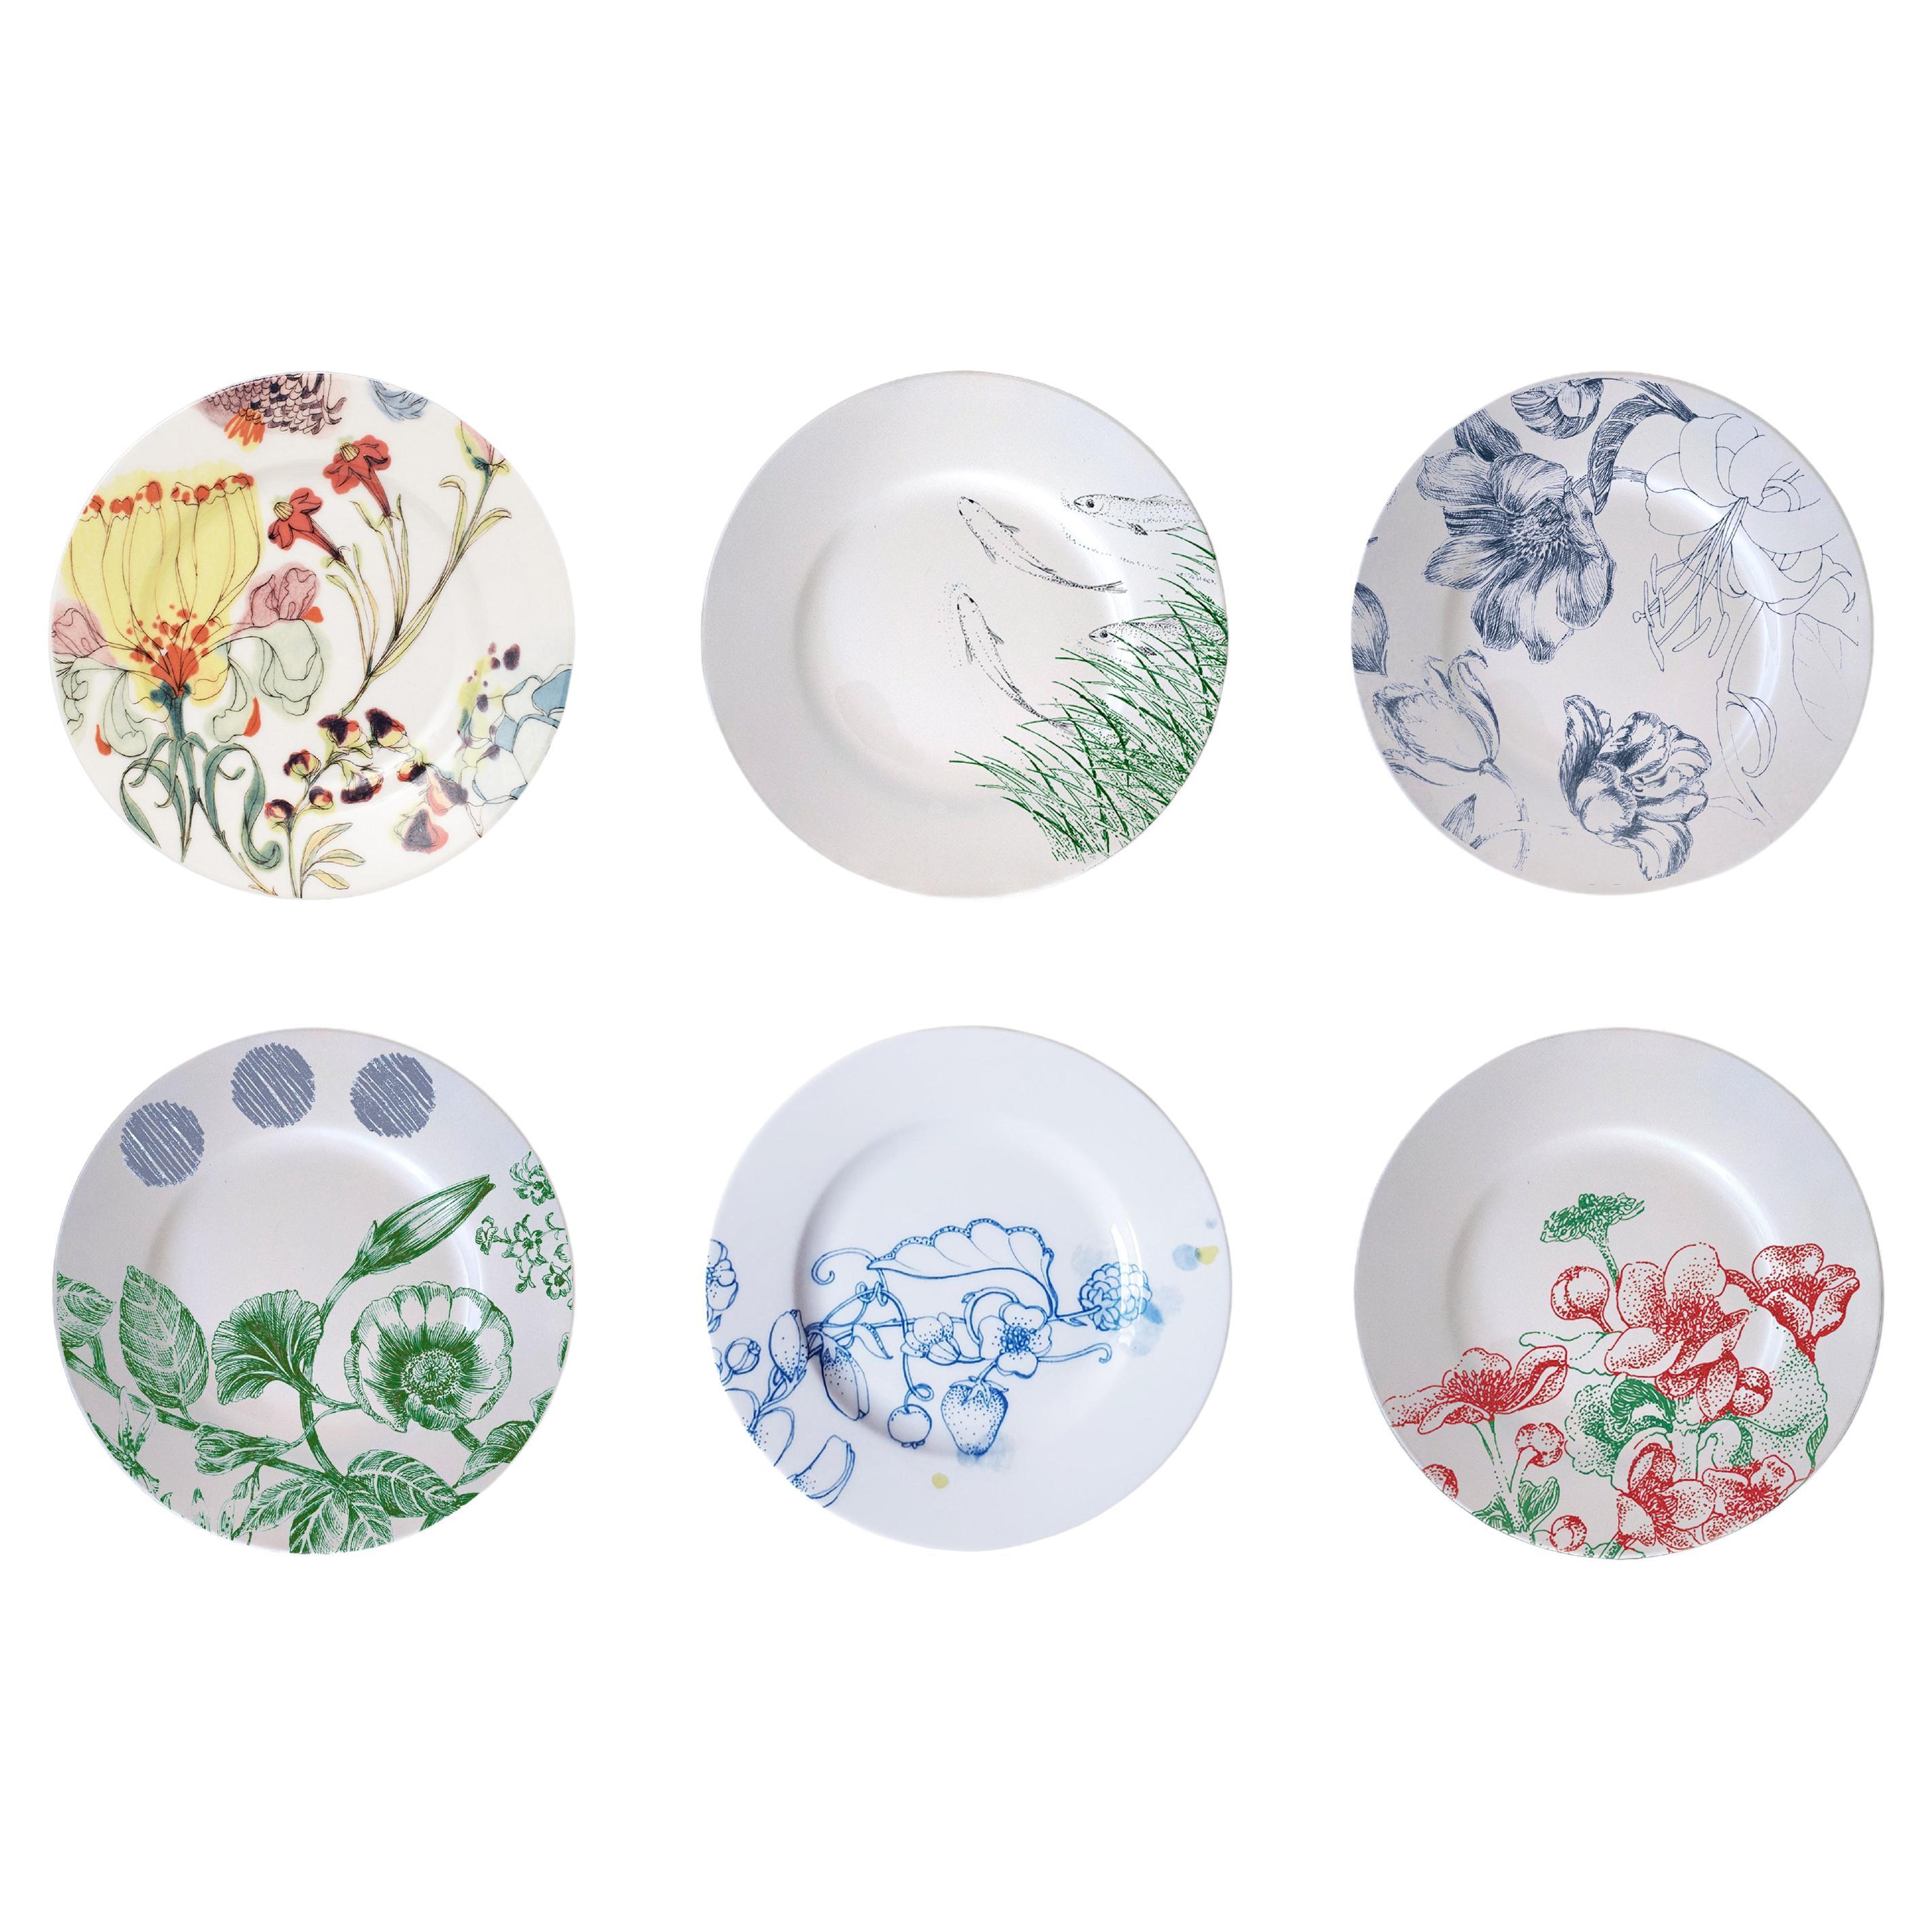 Mix & Match, Six Contemporary Porcelain Bread Plates with Multicolored Flowers